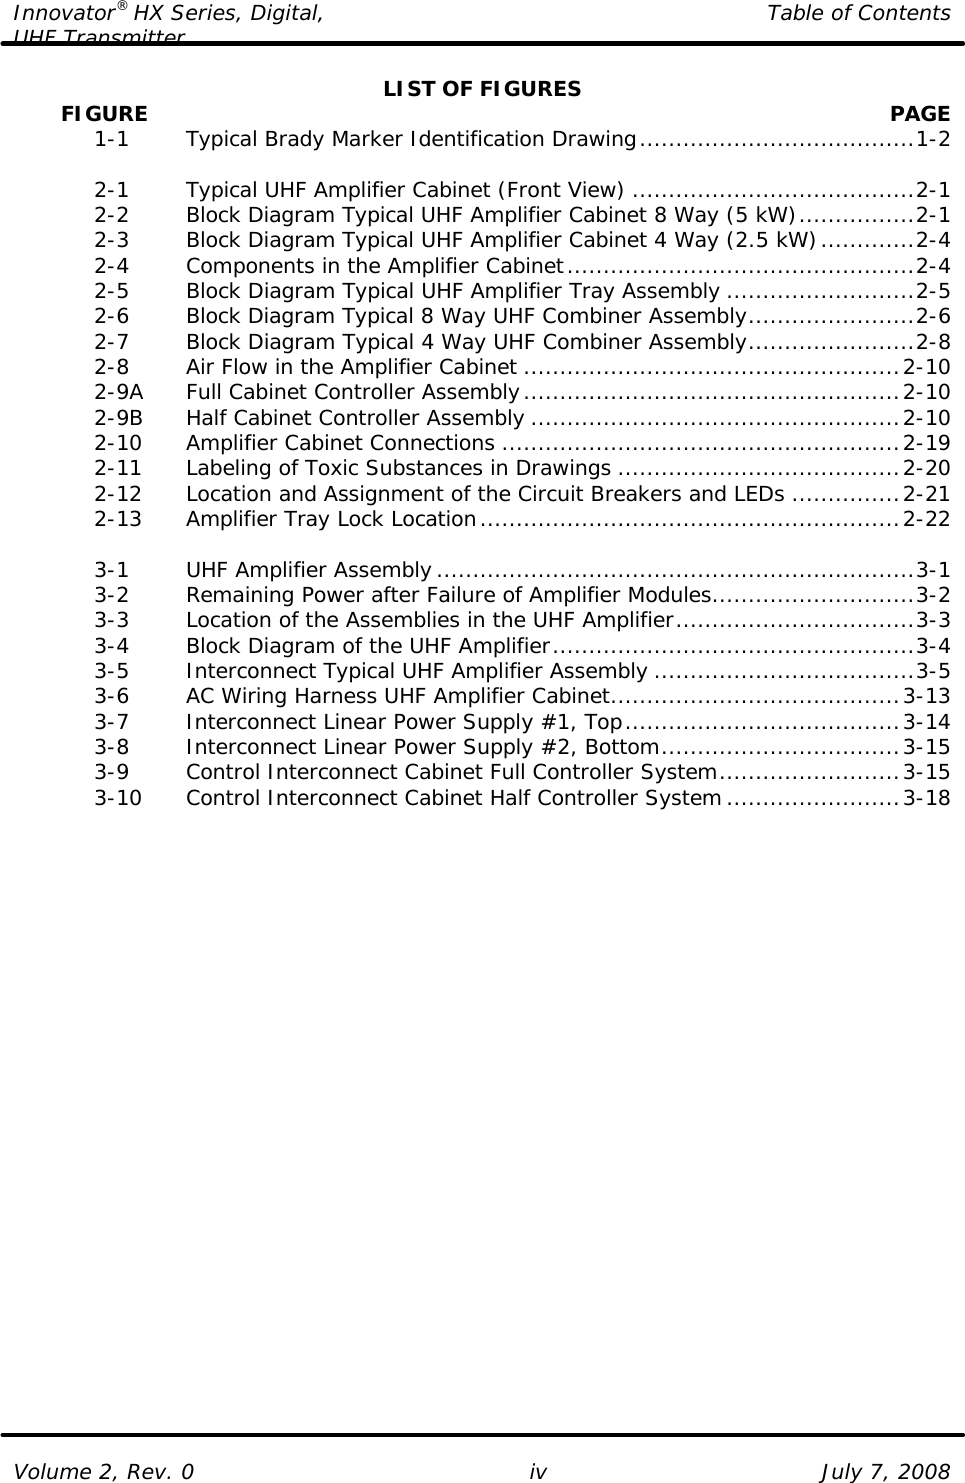 Innovator® HX Series, Digital, Table of Contents UHF Transmitter  Volume 2, Rev. 0 iv July 7, 2008 LIST OF FIGURES        FIGURE    PAGE  1-1   Typical Brady Marker Identification Drawing......................................1-2   2-1   Typical UHF Amplifier Cabinet (Front View) .......................................2-1  2-2   Block Diagram Typical UHF Amplifier Cabinet 8 Way (5 kW)................2-1  2-3   Block Diagram Typical UHF Amplifier Cabinet 4 Way (2.5 kW).............2-4  2-4   Components in the Amplifier Cabinet................................................2-4  2-5   Block Diagram Typical UHF Amplifier Tray Assembly ..........................2-5  2-6   Block Diagram Typical 8 Way UHF Combiner Assembly.......................2-6  2-7   Block Diagram Typical 4 Way UHF Combiner Assembly.......................2-8  2-8   Air Flow in the Amplifier Cabinet ....................................................2-10  2-9A Full Cabinet Controller Assembly....................................................2-10  2-9B Half Cabinet Controller Assembly ...................................................2-10  2-10 Amplifier Cabinet Connections .......................................................2-19  2-11 Labeling of Toxic Substances in Drawings .......................................2-20  2-12 Location and Assignment of the Circuit Breakers and LEDs ...............2-21  2-13 Amplifier Tray Lock Location..........................................................2-22   3-1   UHF Amplifier Assembly..................................................................3-1  3-2   Remaining Power after Failure of Amplifier Modules............................3-2  3-3   Location of the Assemblies in the UHF Amplifier.................................3-3  3-4   Block Diagram of the UHF Amplifier..................................................3-4  3-5   Interconnect Typical UHF Amplifier Assembly ....................................3-5  3-6   AC Wiring Harness UHF Amplifier Cabinet........................................3-13  3-7   Interconnect Linear Power Supply #1, Top......................................3-14  3-8   Interconnect Linear Power Supply #2, Bottom.................................3-15  3-9   Control Interconnect Cabinet Full Controller System.........................3-15  3-10 Control Interconnect Cabinet Half Controller System........................3-18  